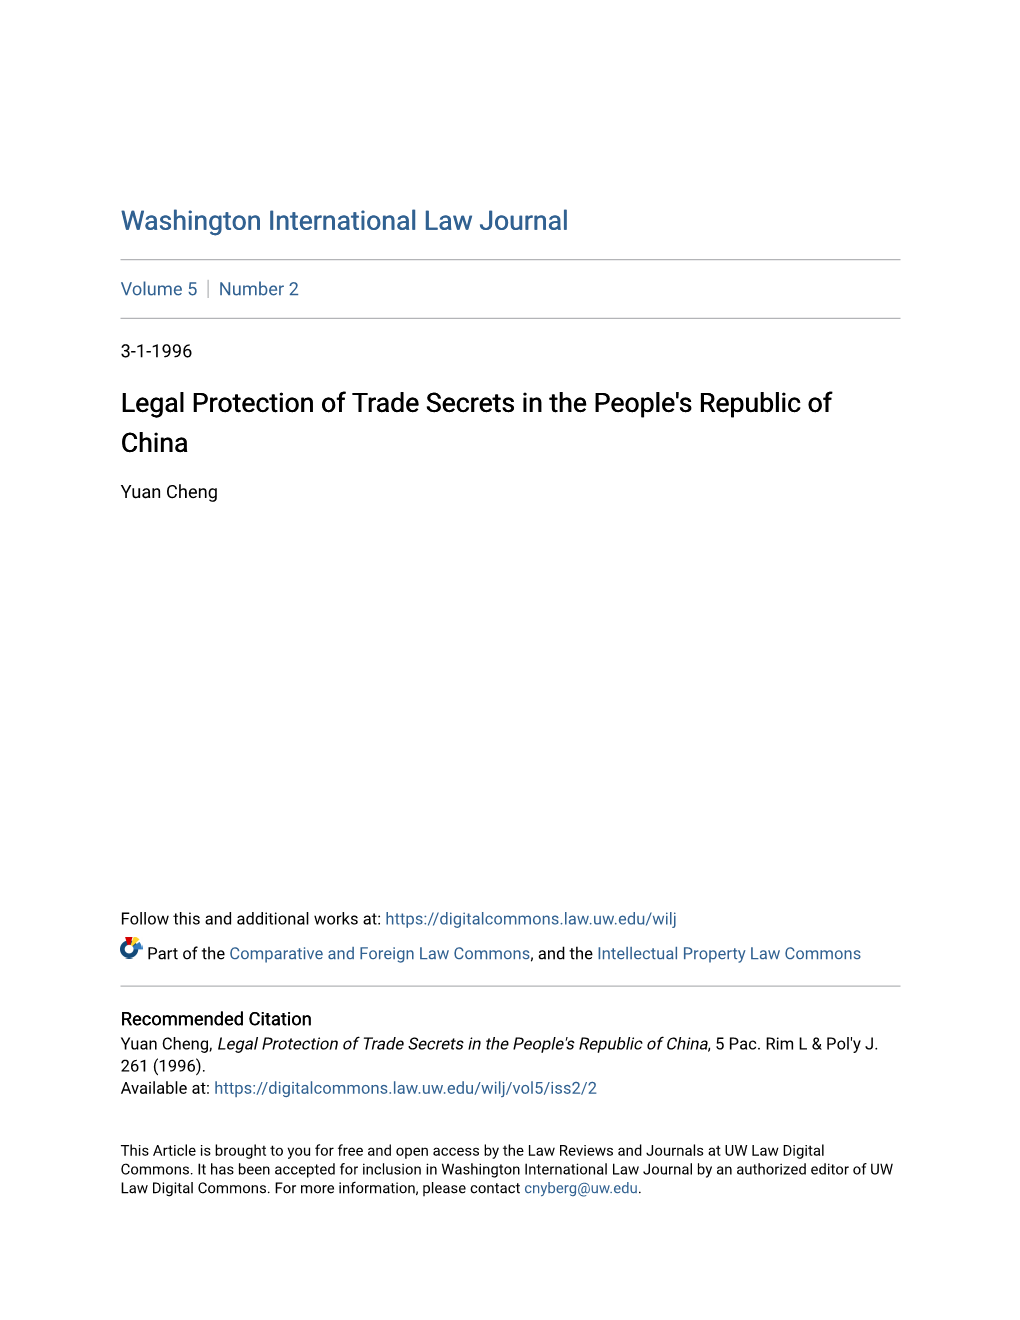 Legal Protection of Trade Secrets in the People's Republic of China